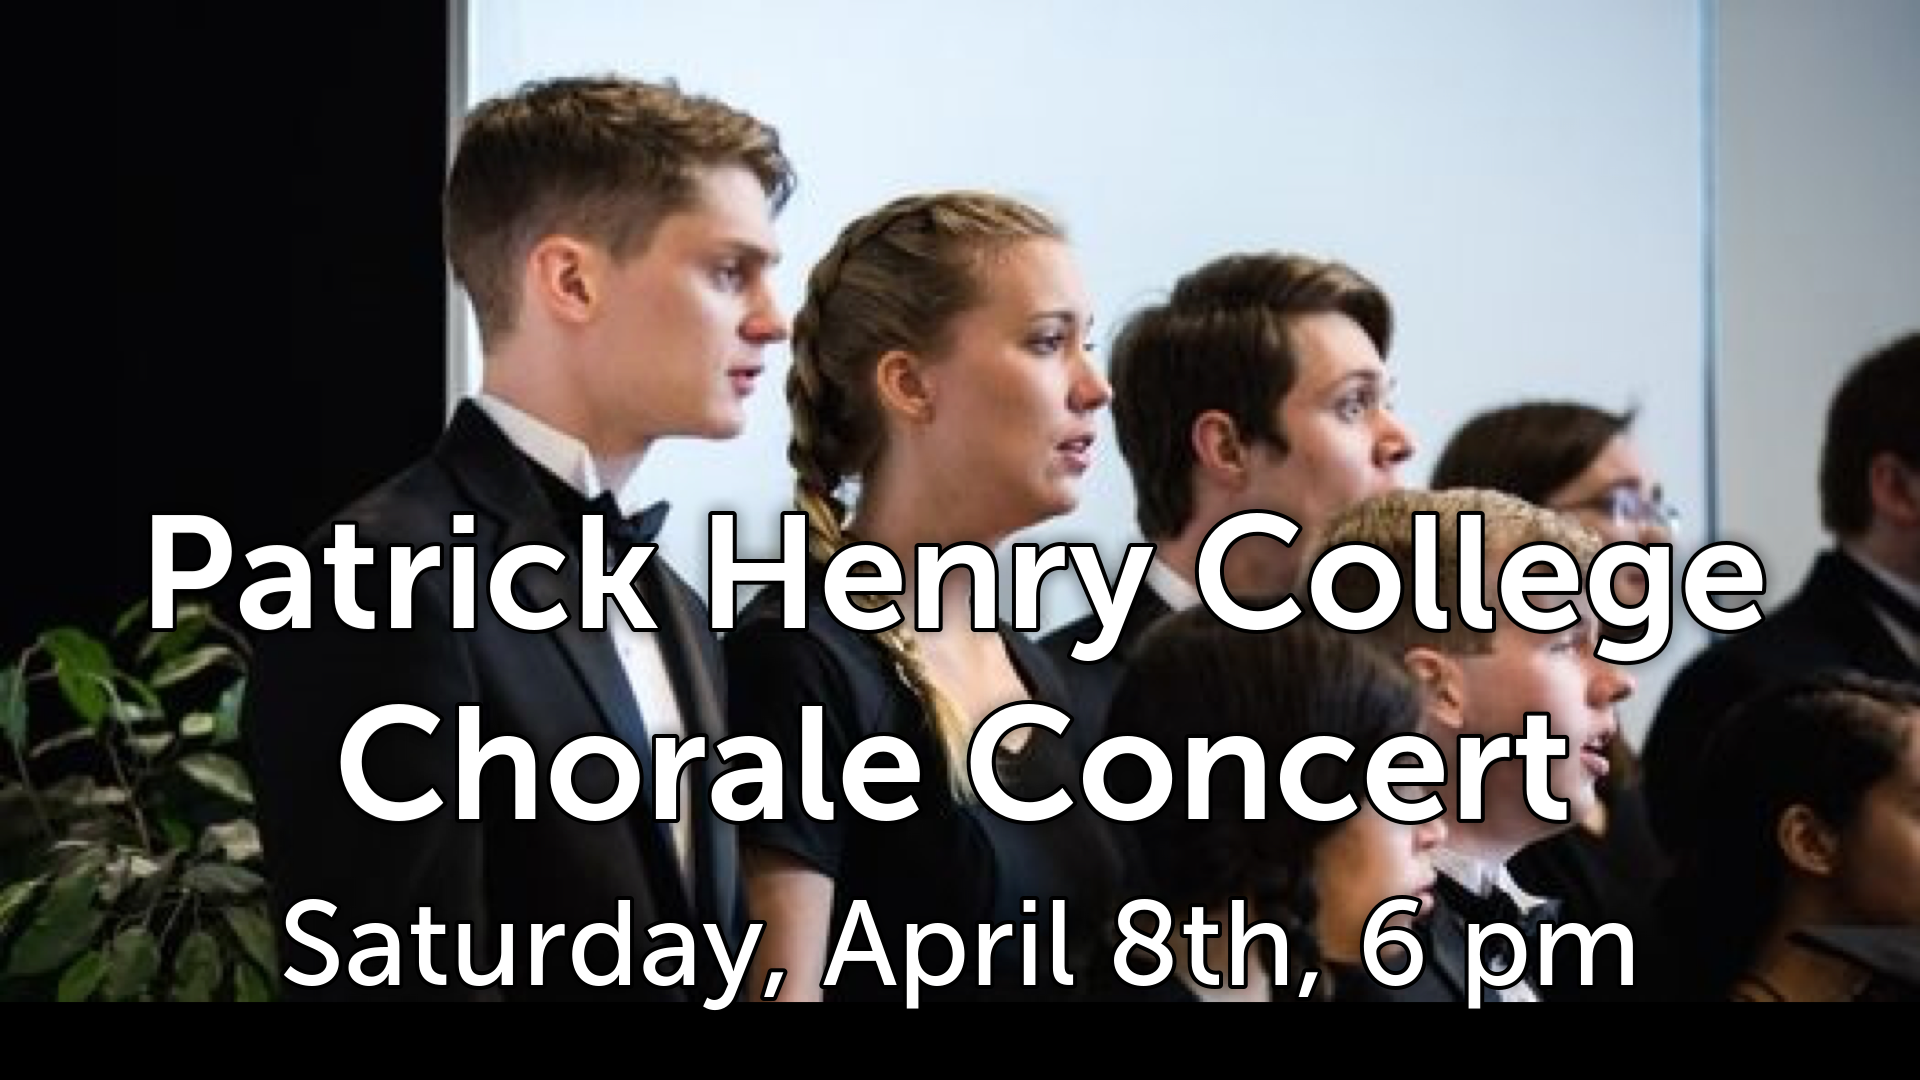 Patrick Henry College Chorale